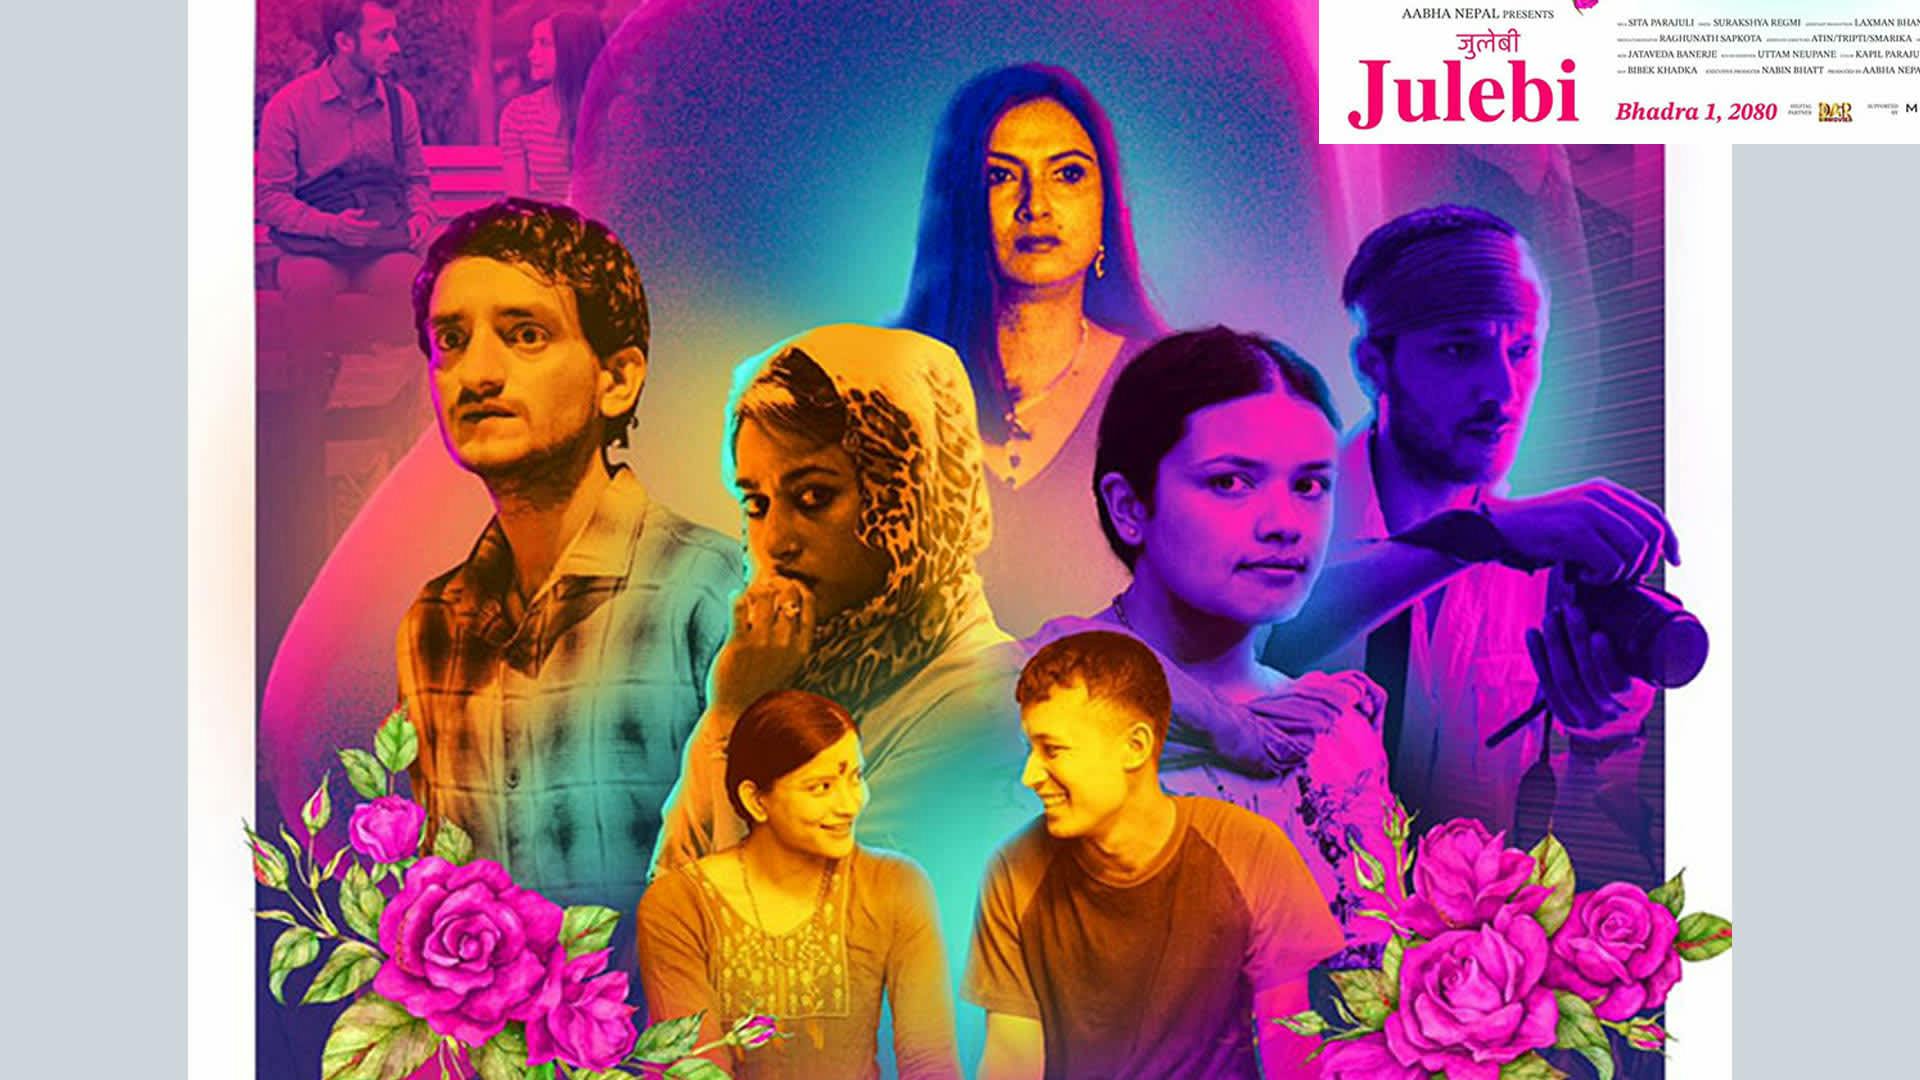 'Julebi' is the love story of four women.